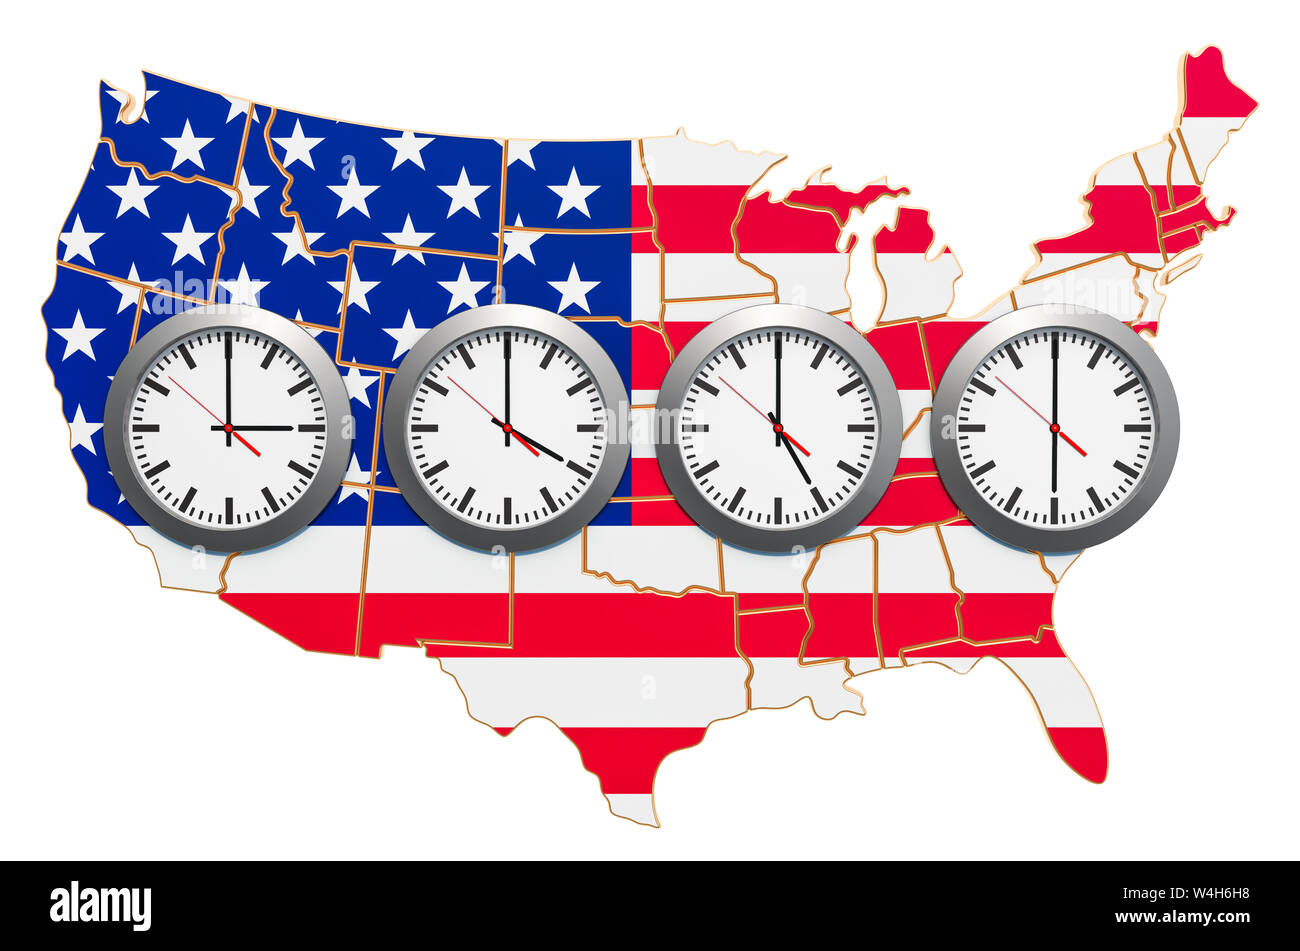 Time Zones in the United States concept. 3D rendering isolated on white background Stock Photo